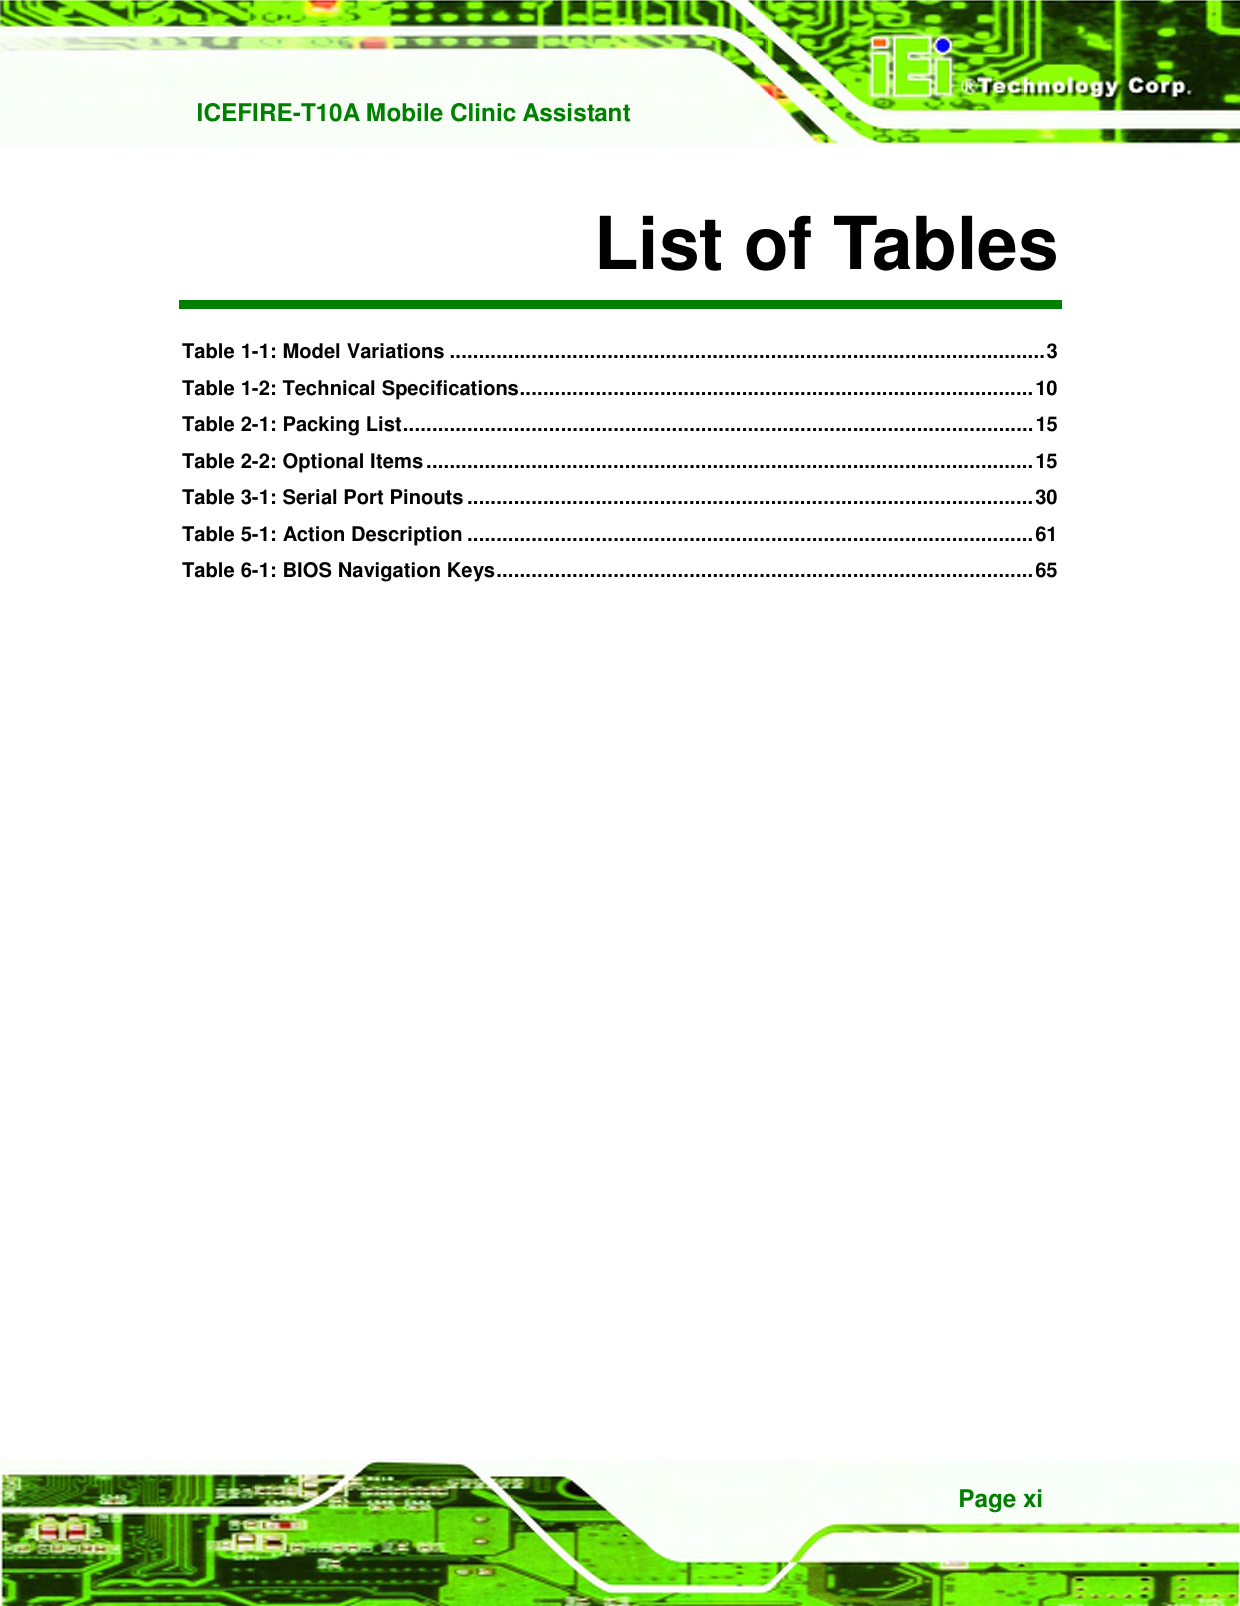   ICEFIRE-T10A Mobile Clinic Assistant Page xi List of Tables Table 1-1: Model Variations ...................................................................................................... 3 Table 1-2: Technical Specifications ........................................................................................ 10 Table 2-1: Packing List ............................................................................................................ 15 Table 2-2: Optional Items ........................................................................................................ 15 Table 3-1: Serial Port Pinouts ................................................................................................. 30 Table 5-1: Action Description ................................................................................................. 61 Table 6-1: BIOS Navigation Keys ............................................................................................ 65 